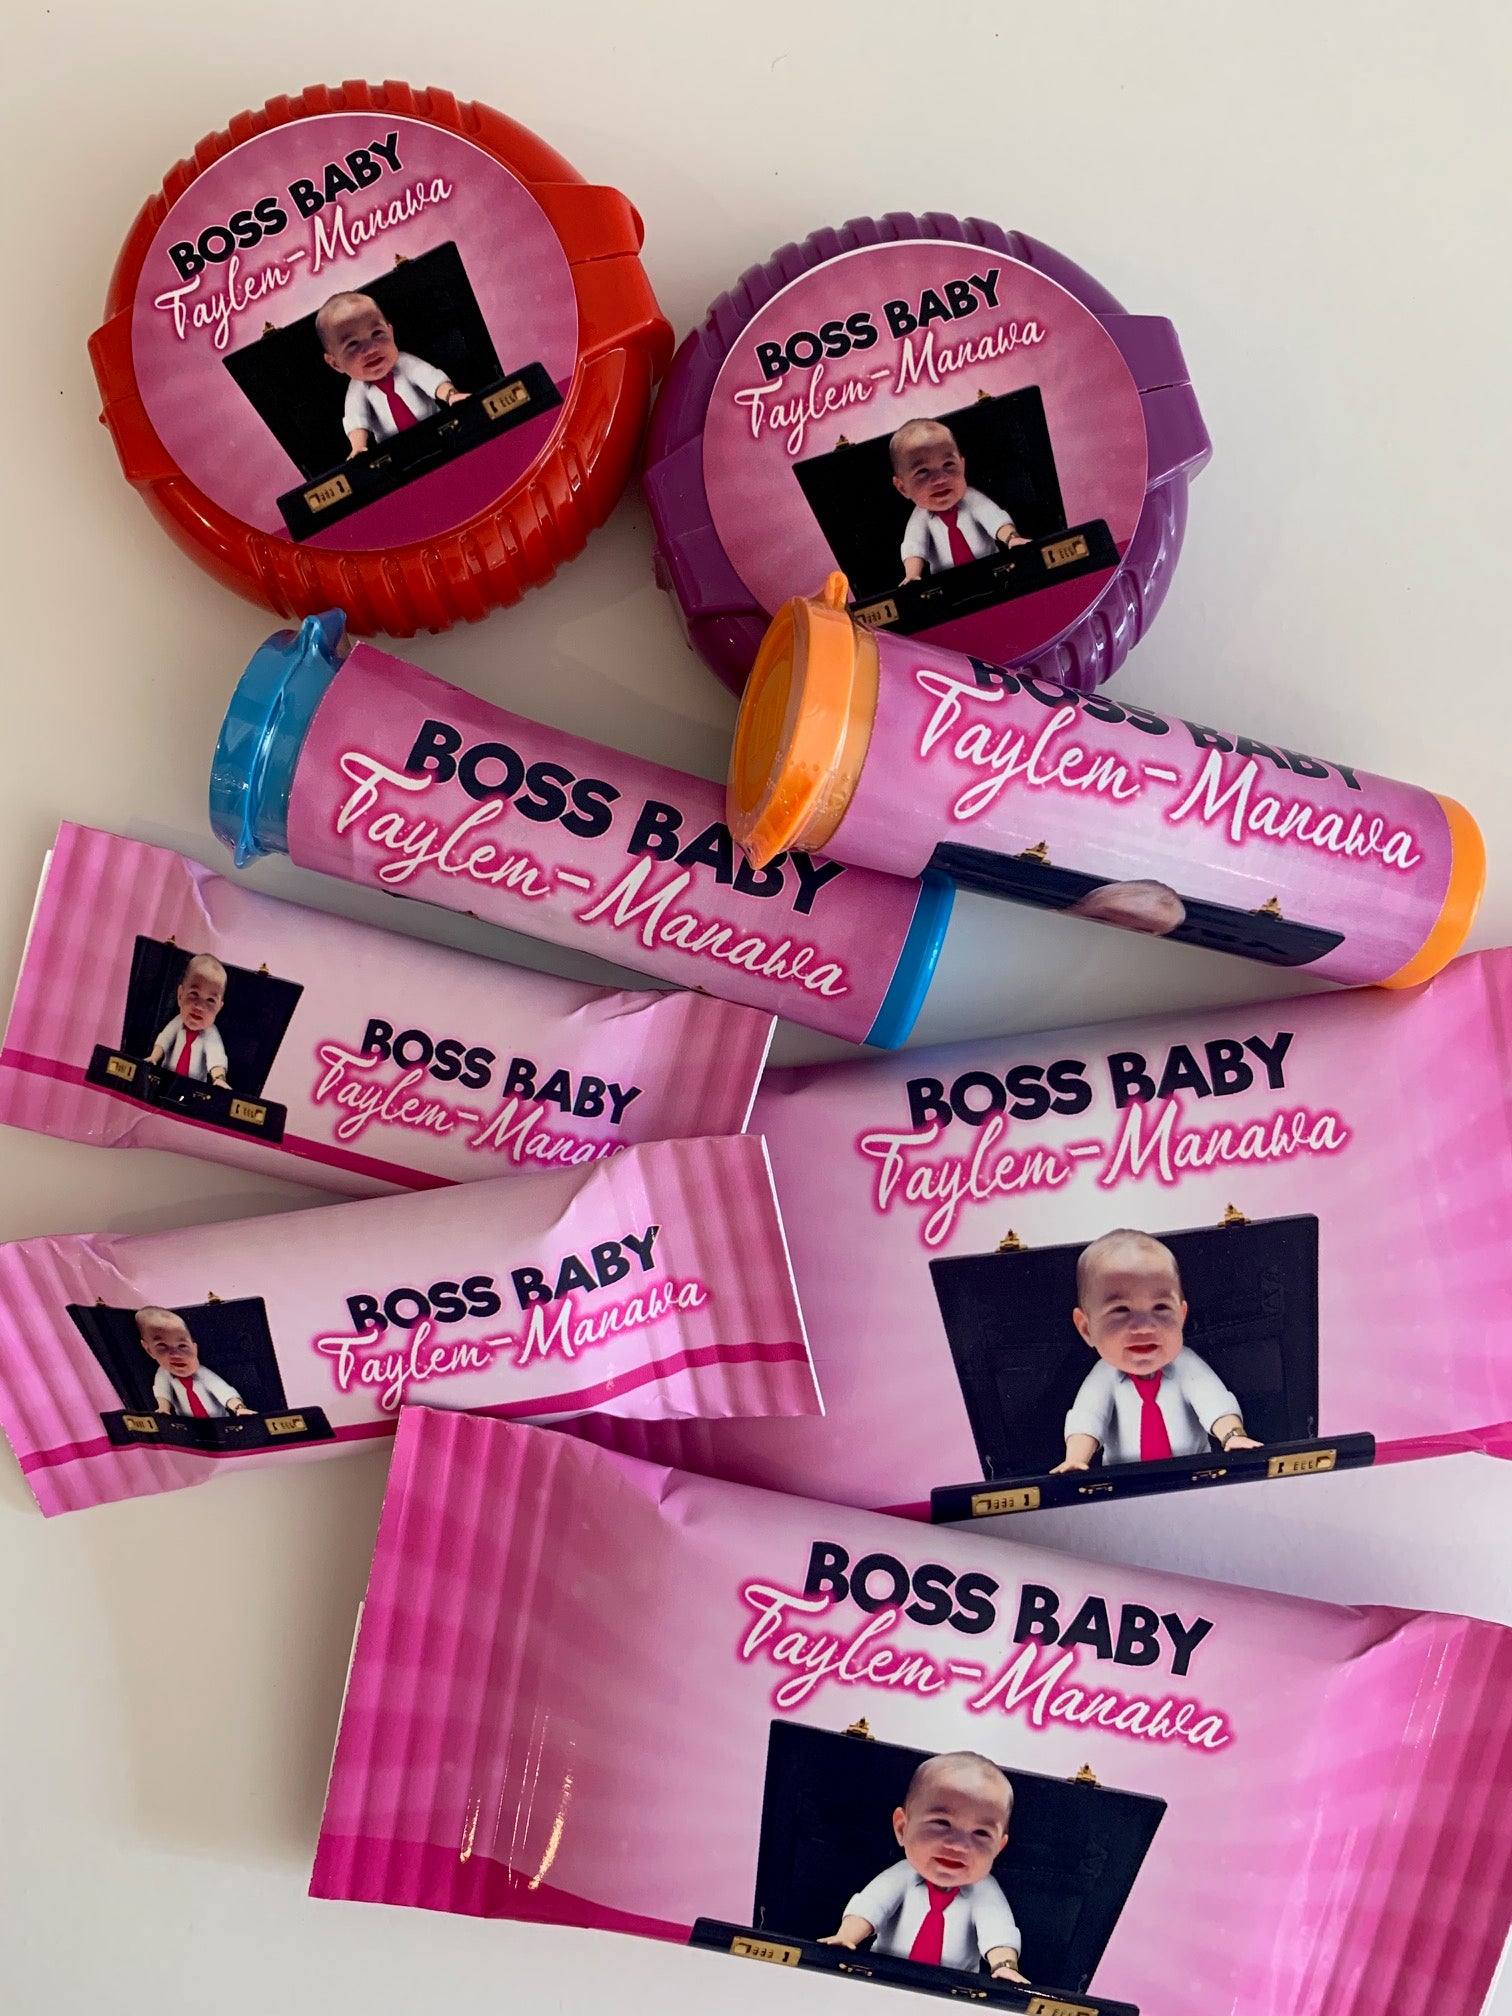 Boss Baby personalised party supplies